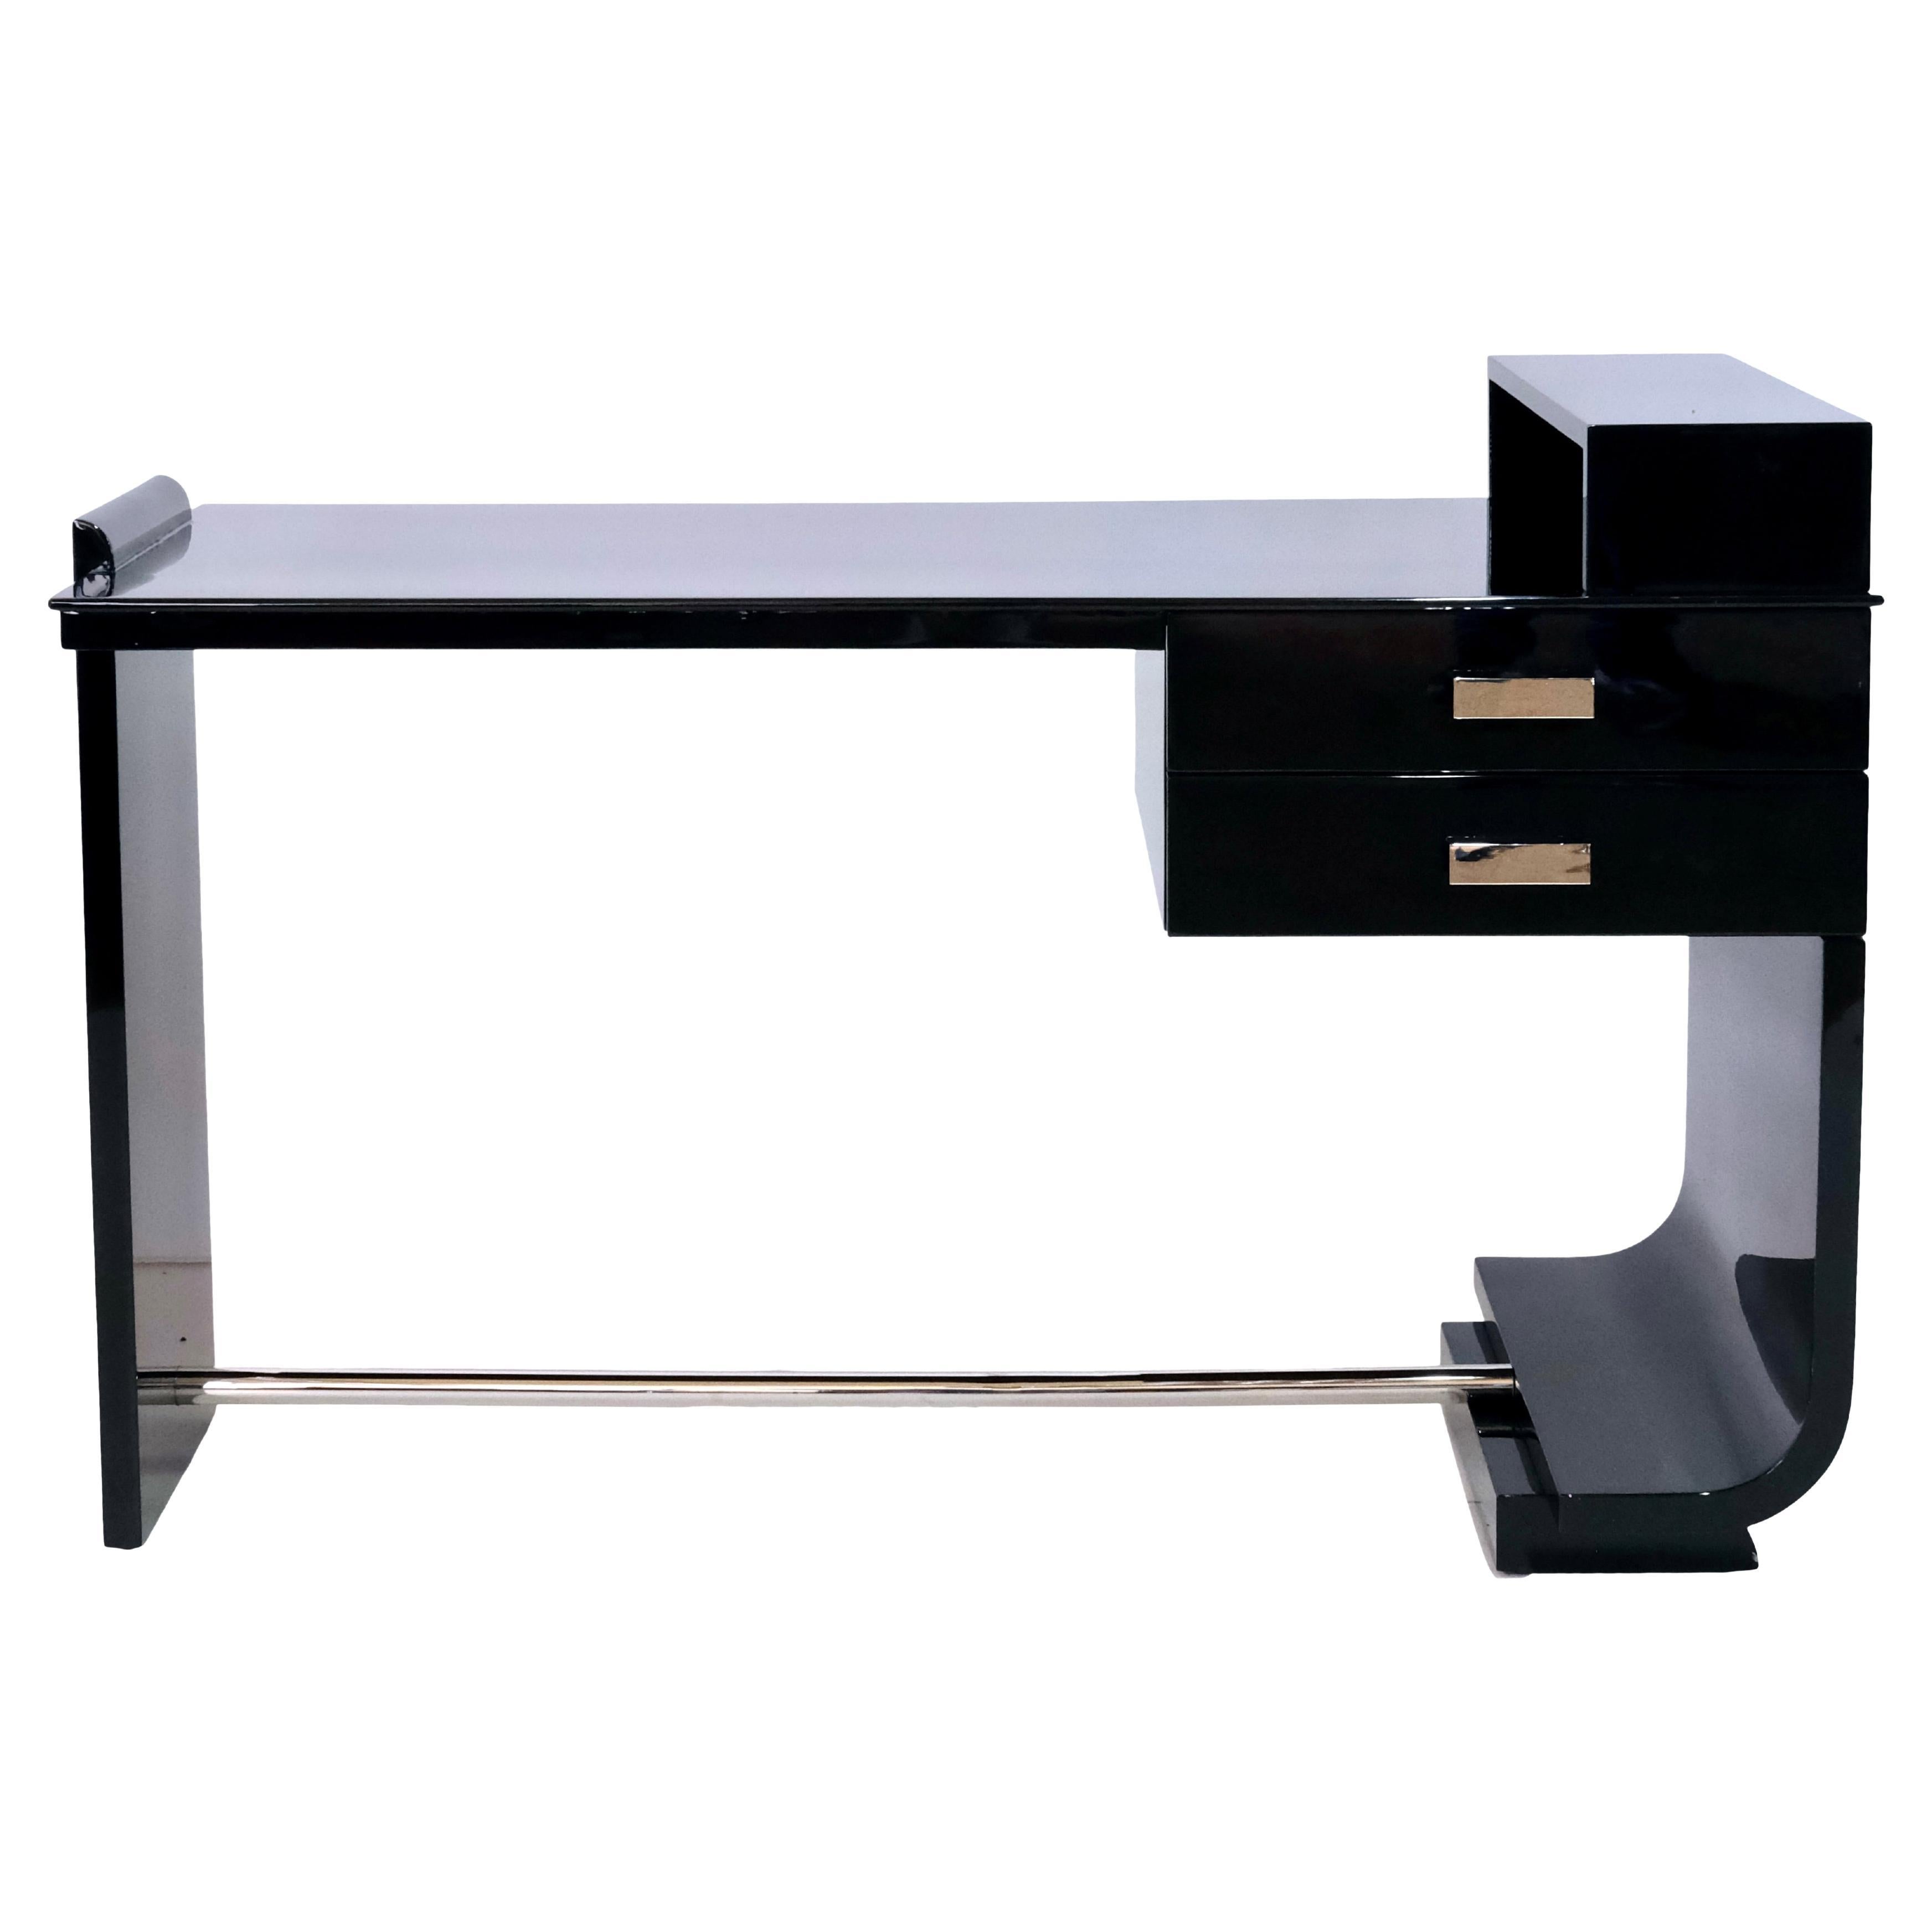 Small Asymmetrical Art Deco Office Desk in Black Lacquer with Nickeled Fittings